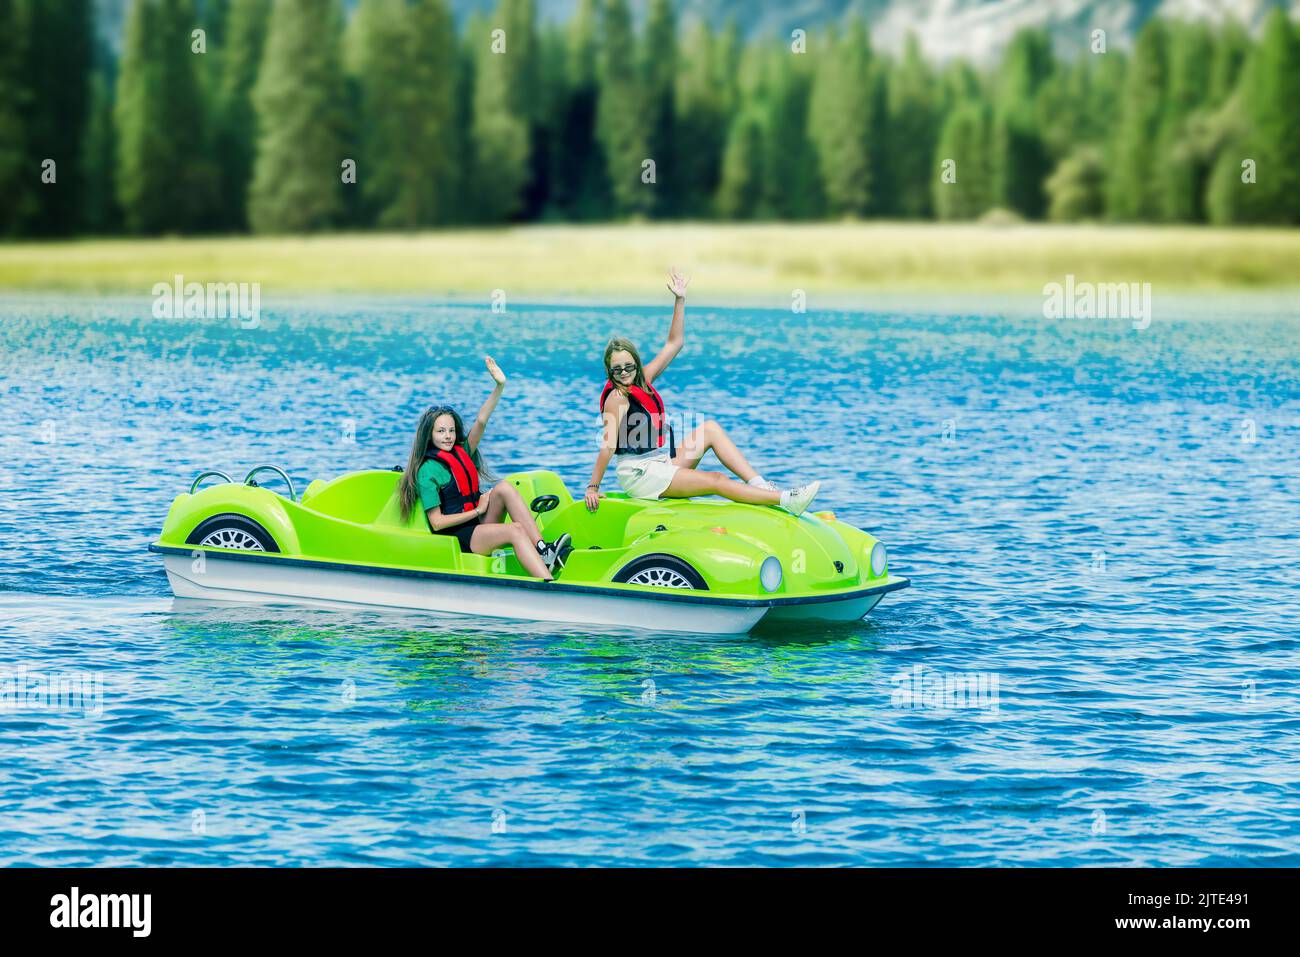 Girls in a green pedal boat on a mountain lake Stock Photo